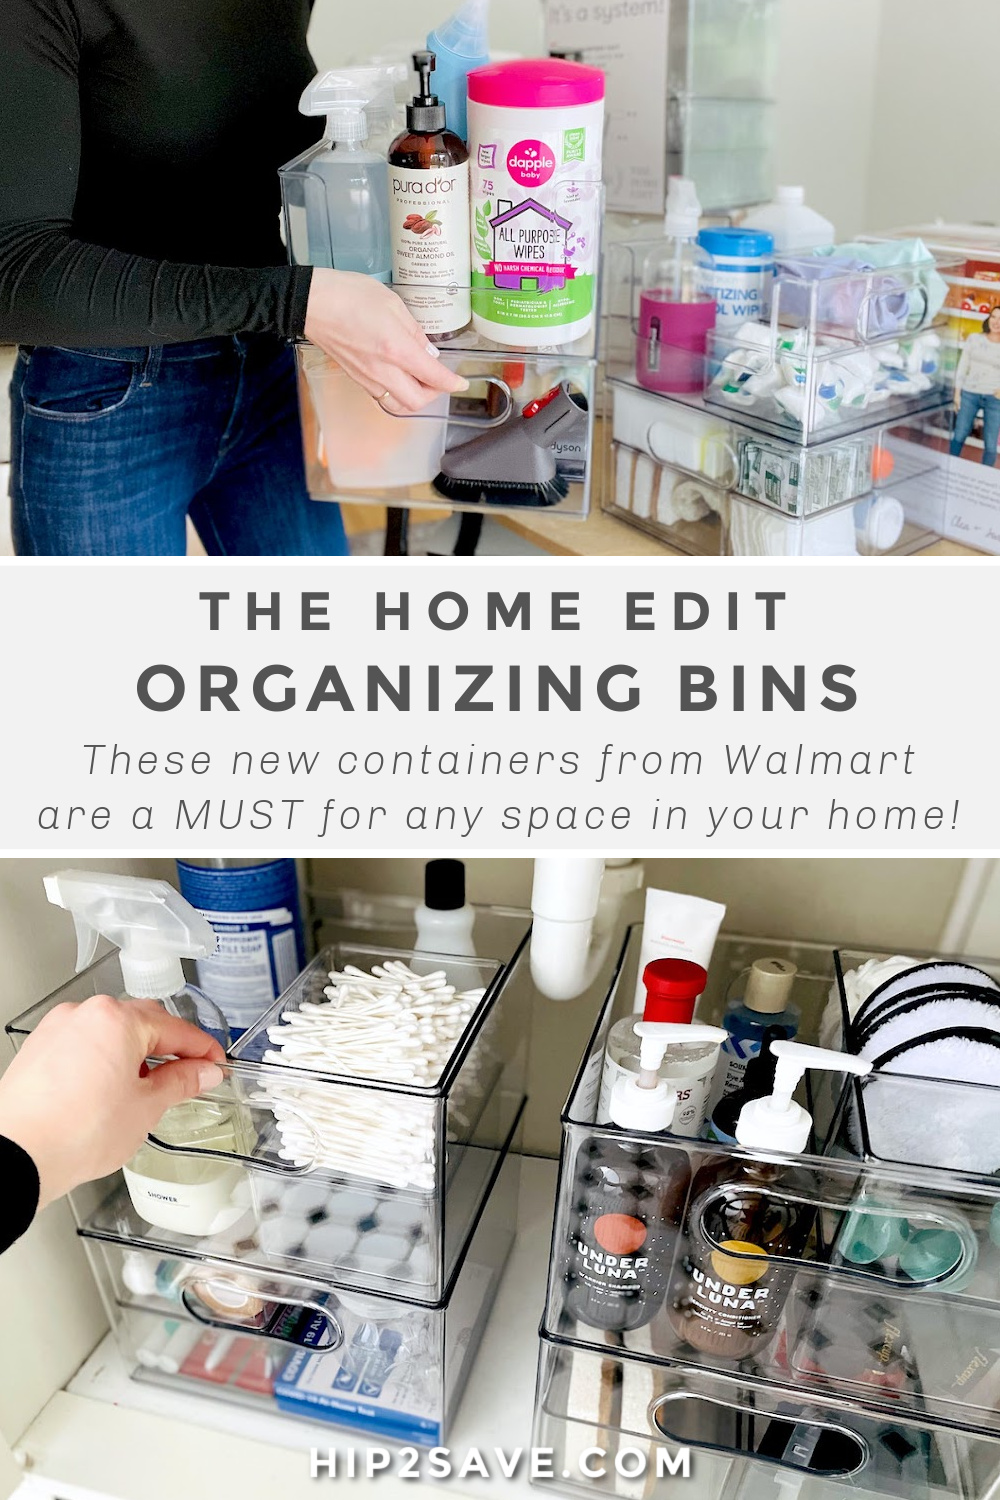 I Really Want To Organize Like The Home Edit, But There's A Problem